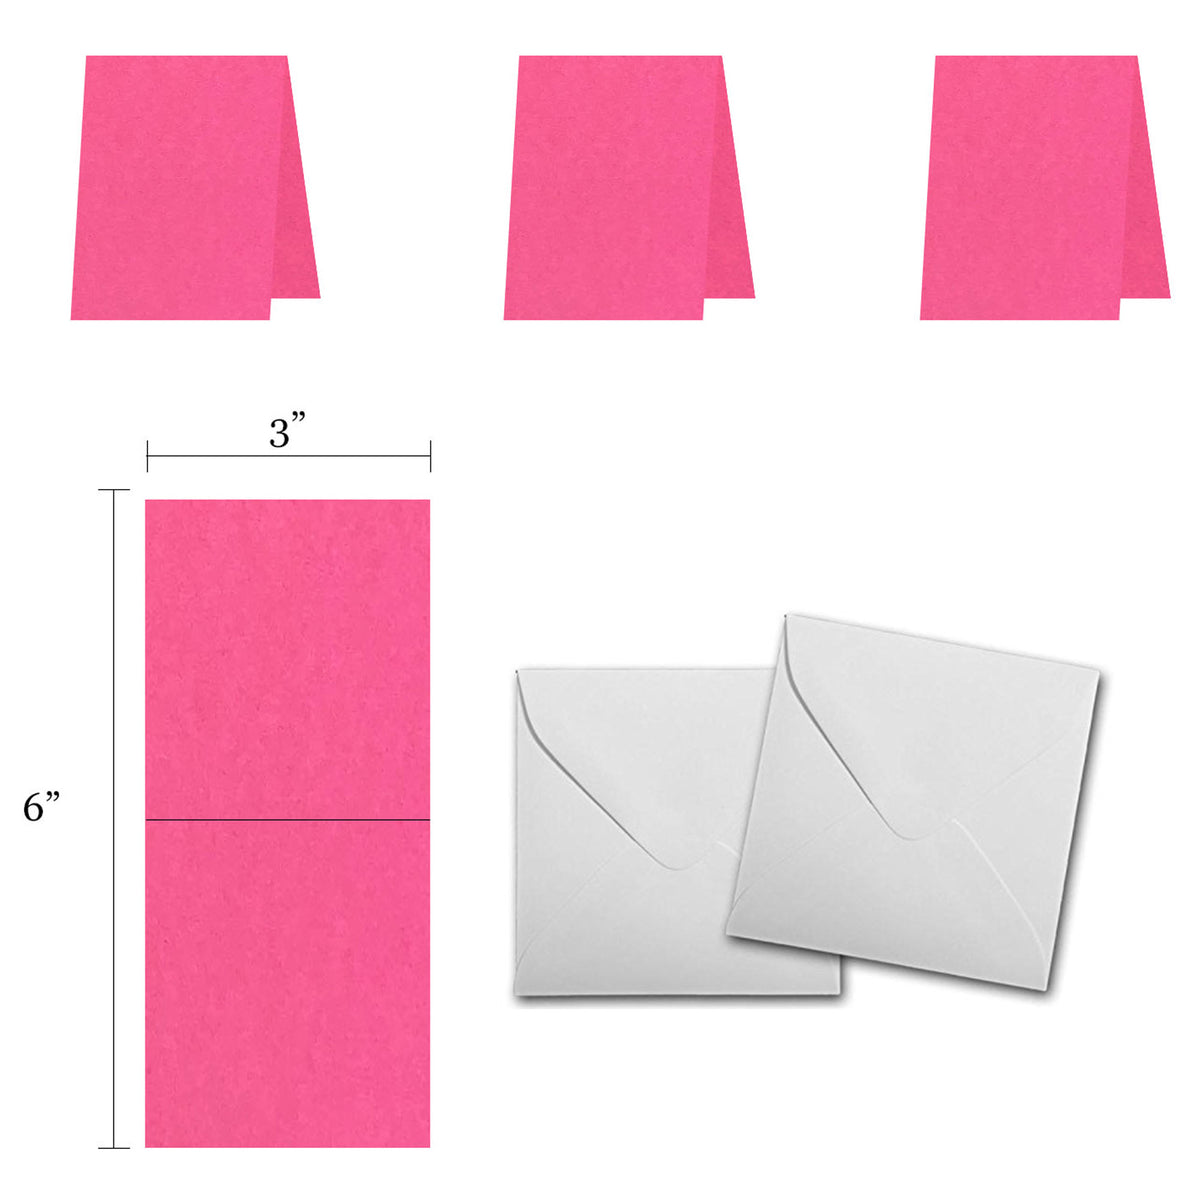 Blank Pink 3x3 Folded Discount Card Stock and Envelopes